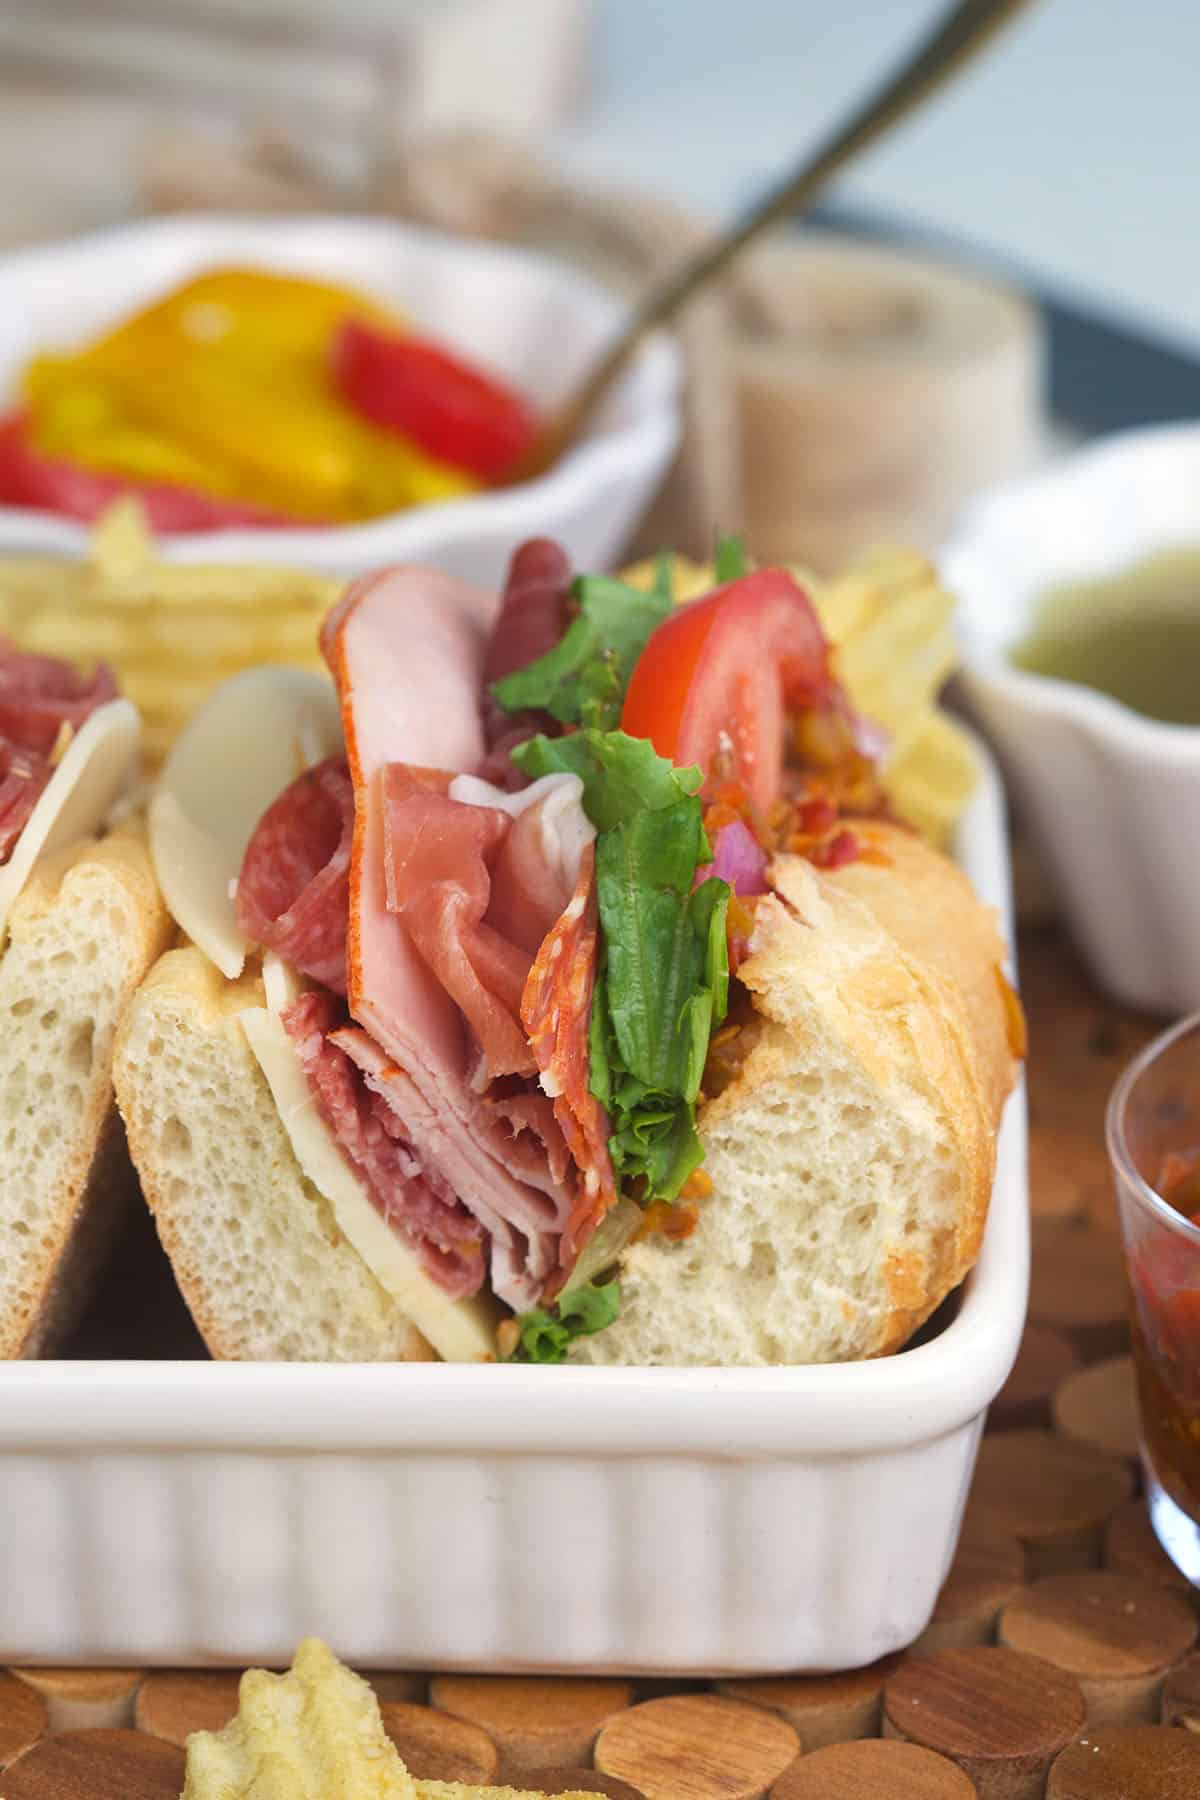 Italian hoagie sliced and placed in a white square sandwich tray.